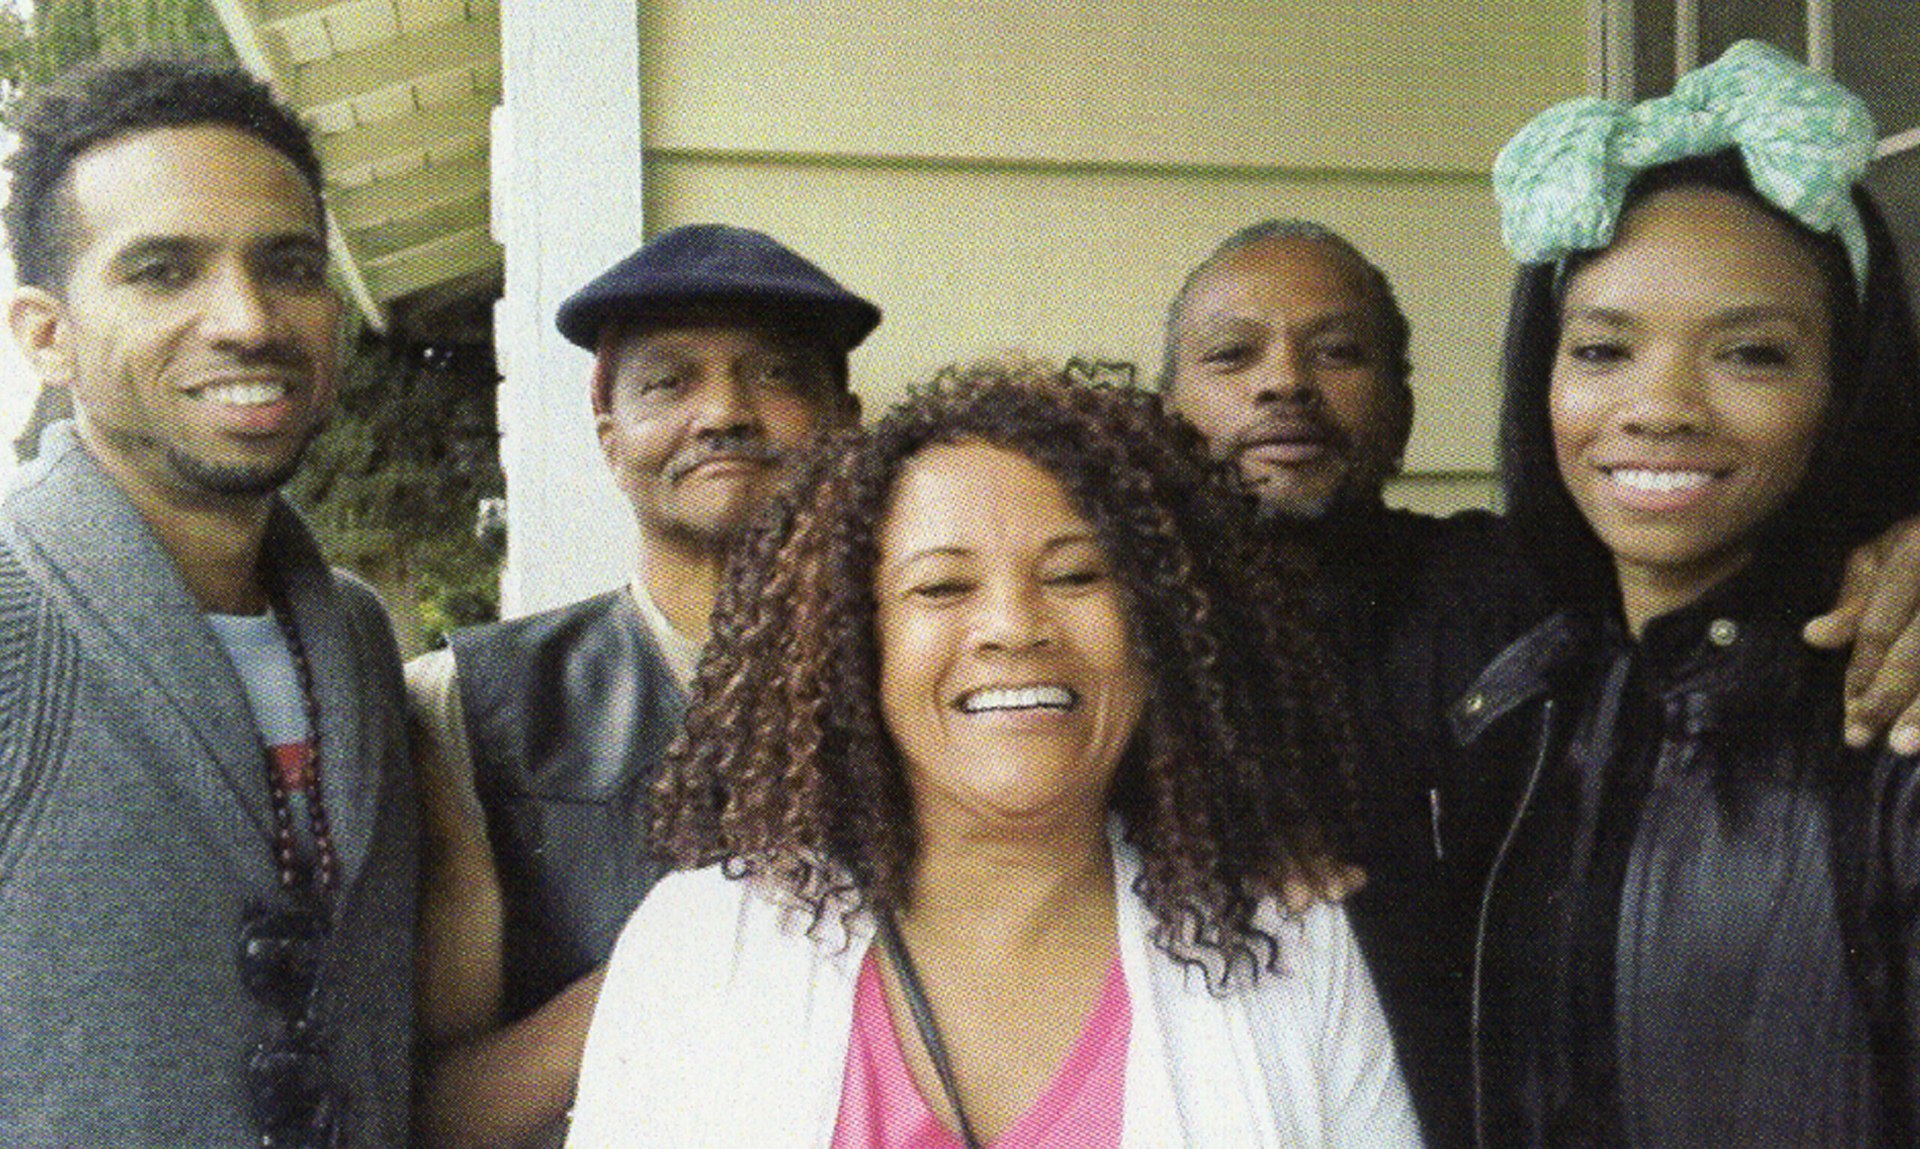 Andre Butler, wearing a hat, poses with two men and two women, all smiling.